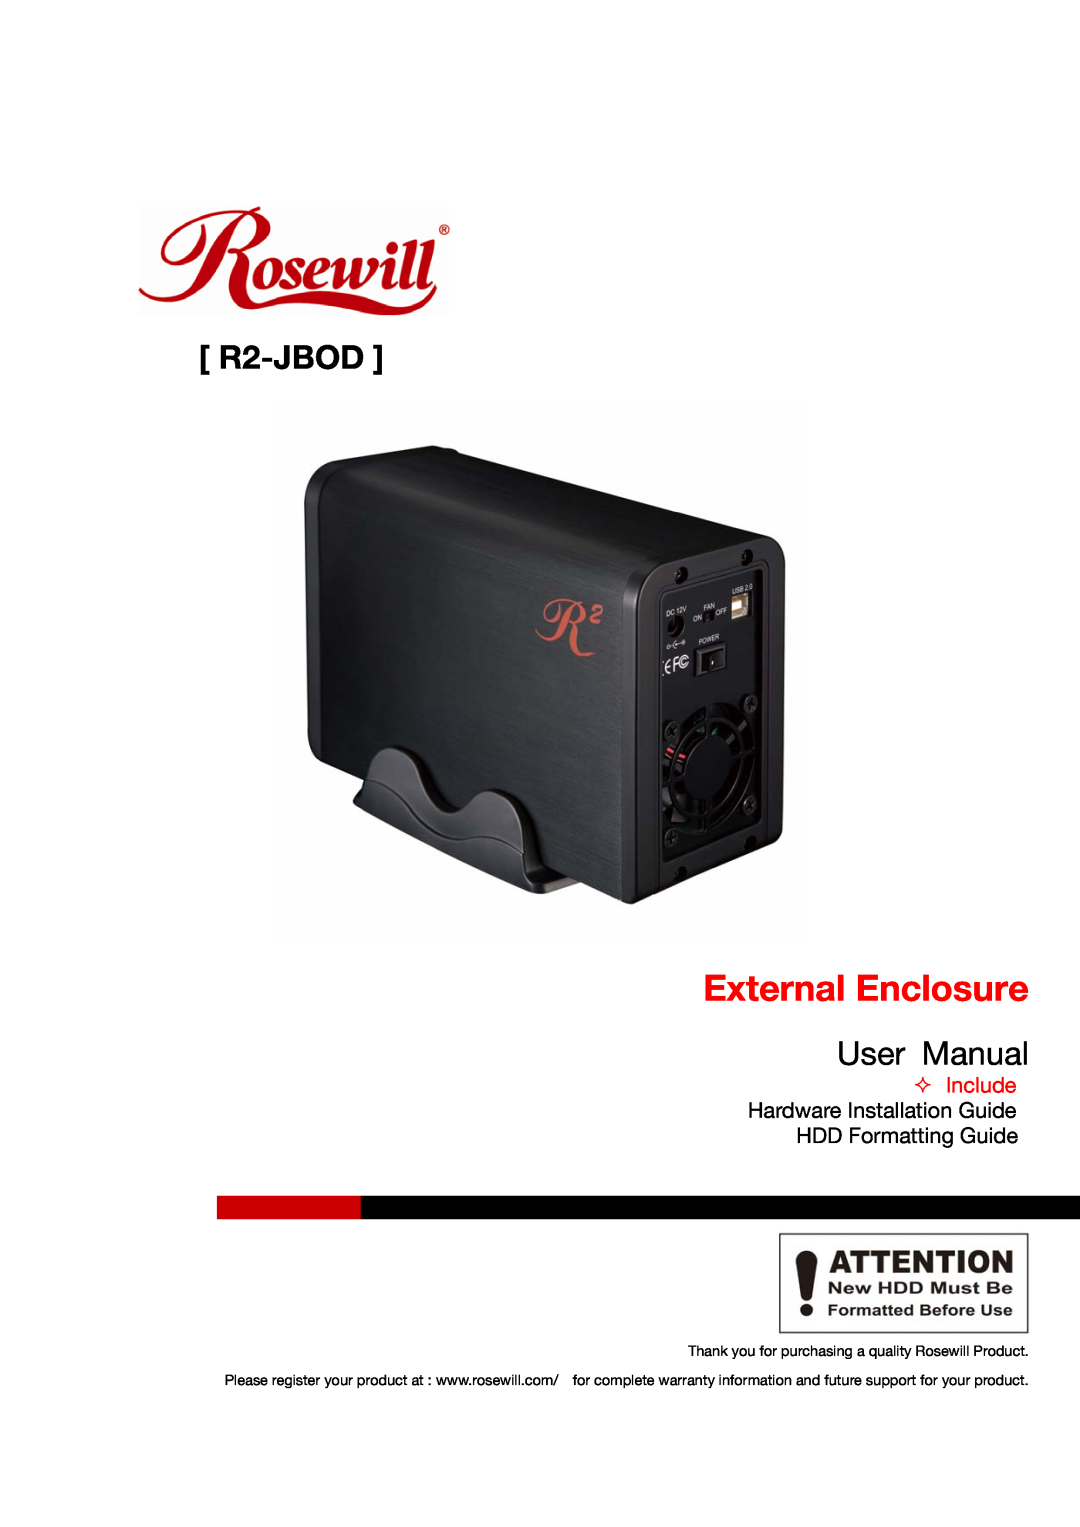 Rosewill R2-JBOD user manual User Manual, Thank you for purchasing a quality Rosewill Product, External Enclosure 